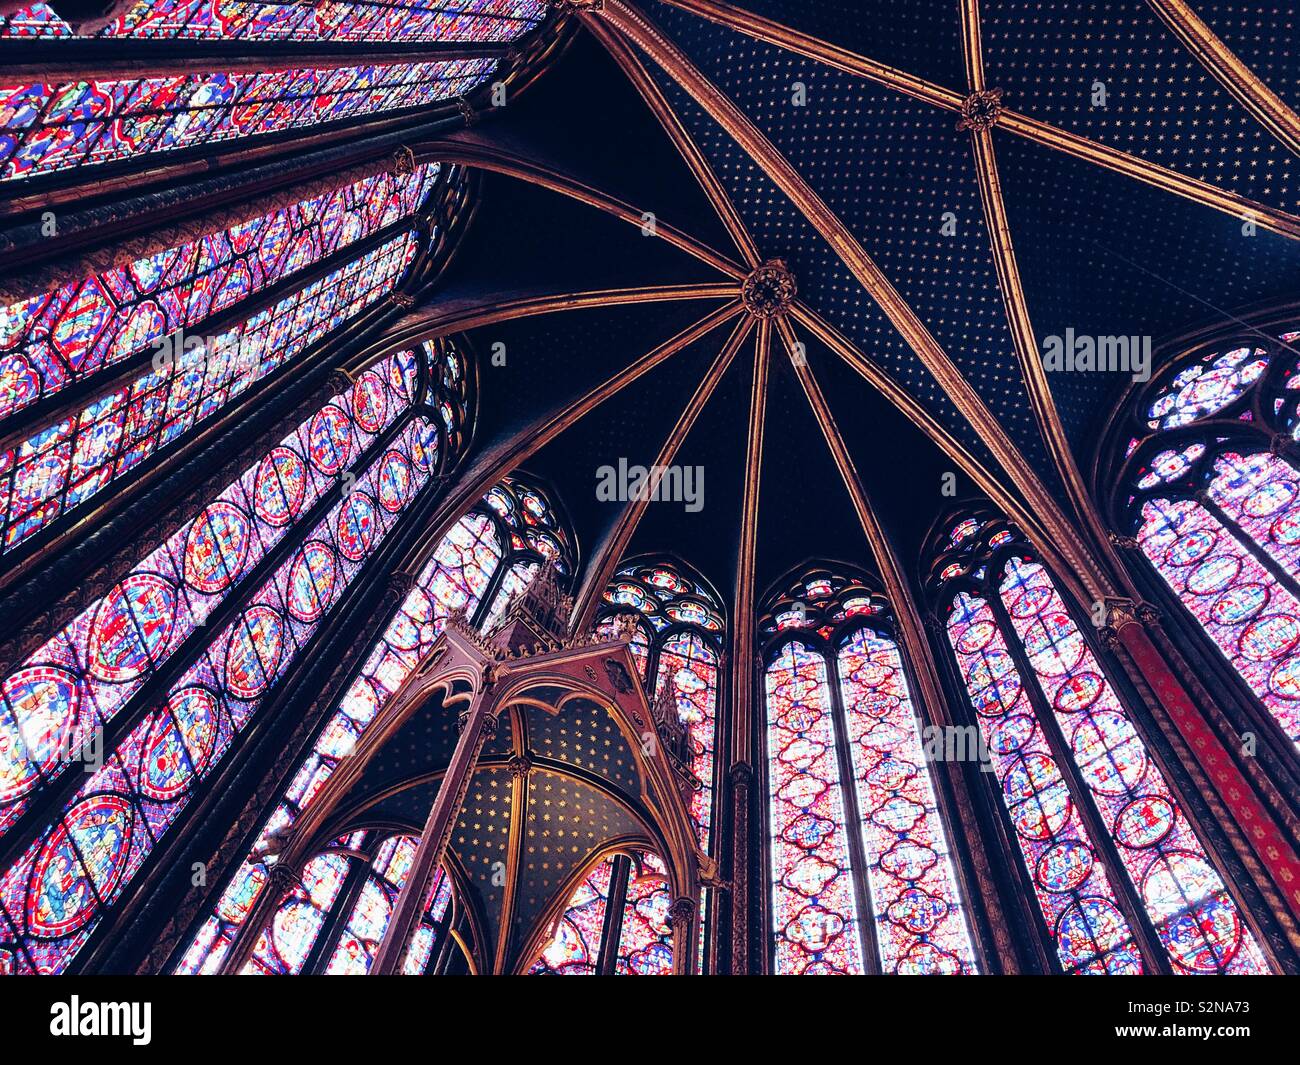 Stained glass windows and ceiling of the magnificent Sainte Chapelle, a royal chapel in the Gothic style, within the medieval Palais de la Cité, the residence of the Kings of France Stock Photo